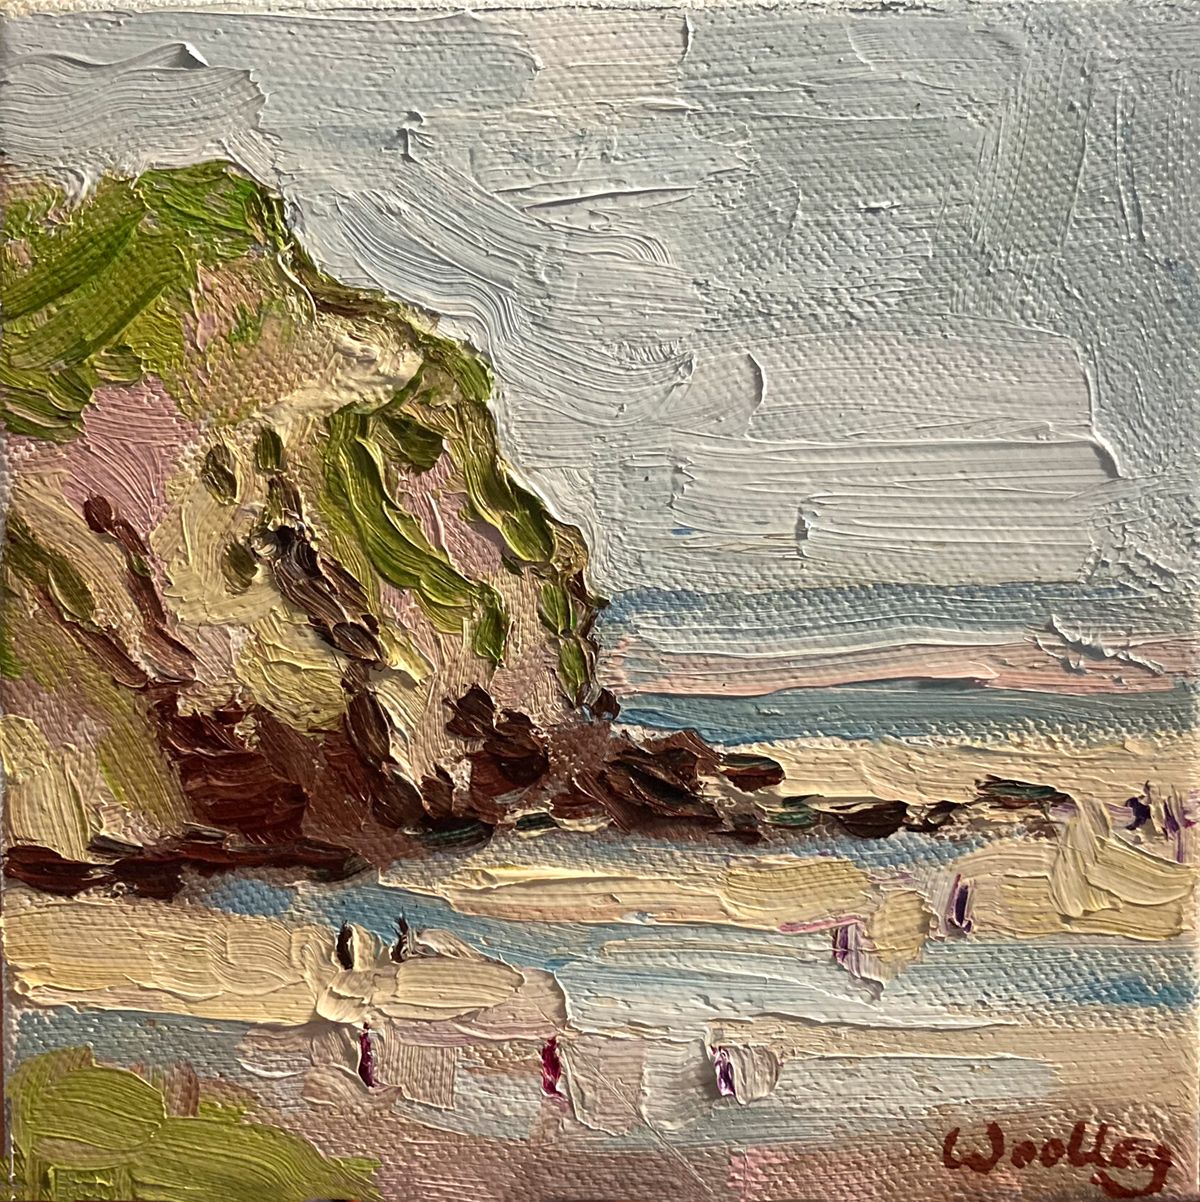 Watching the swimmers at Porthtowan beach Cornwall by Eleanor Woolley